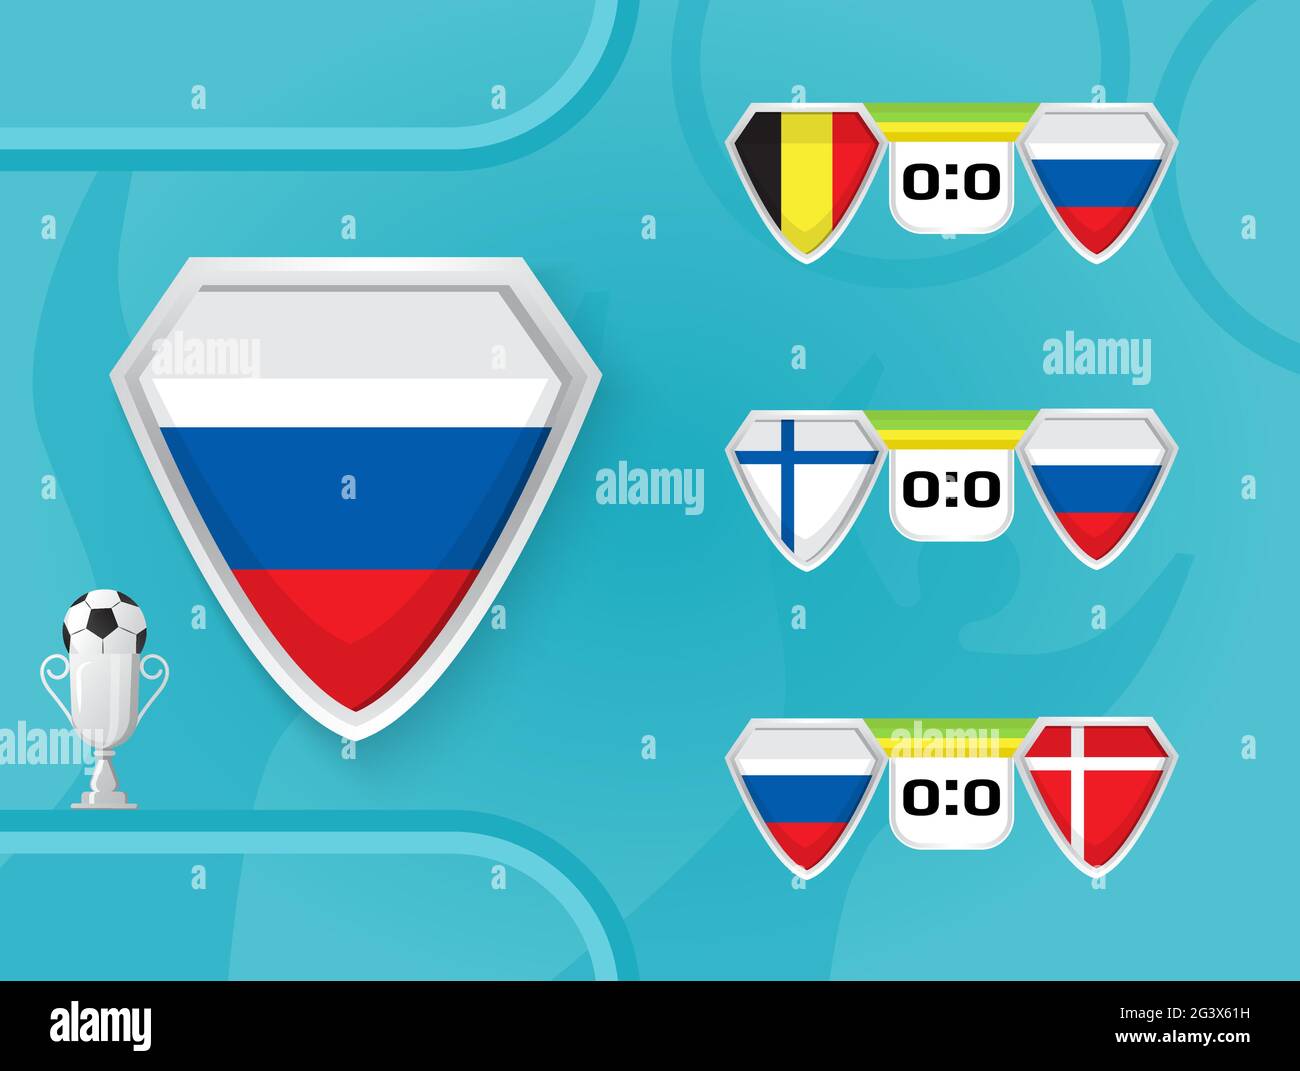 Schedule of national football team of Russia matches in the European Championship 2020. Shields with the flag of Denmark, Finland, Belgium, Russia. Stock Vector